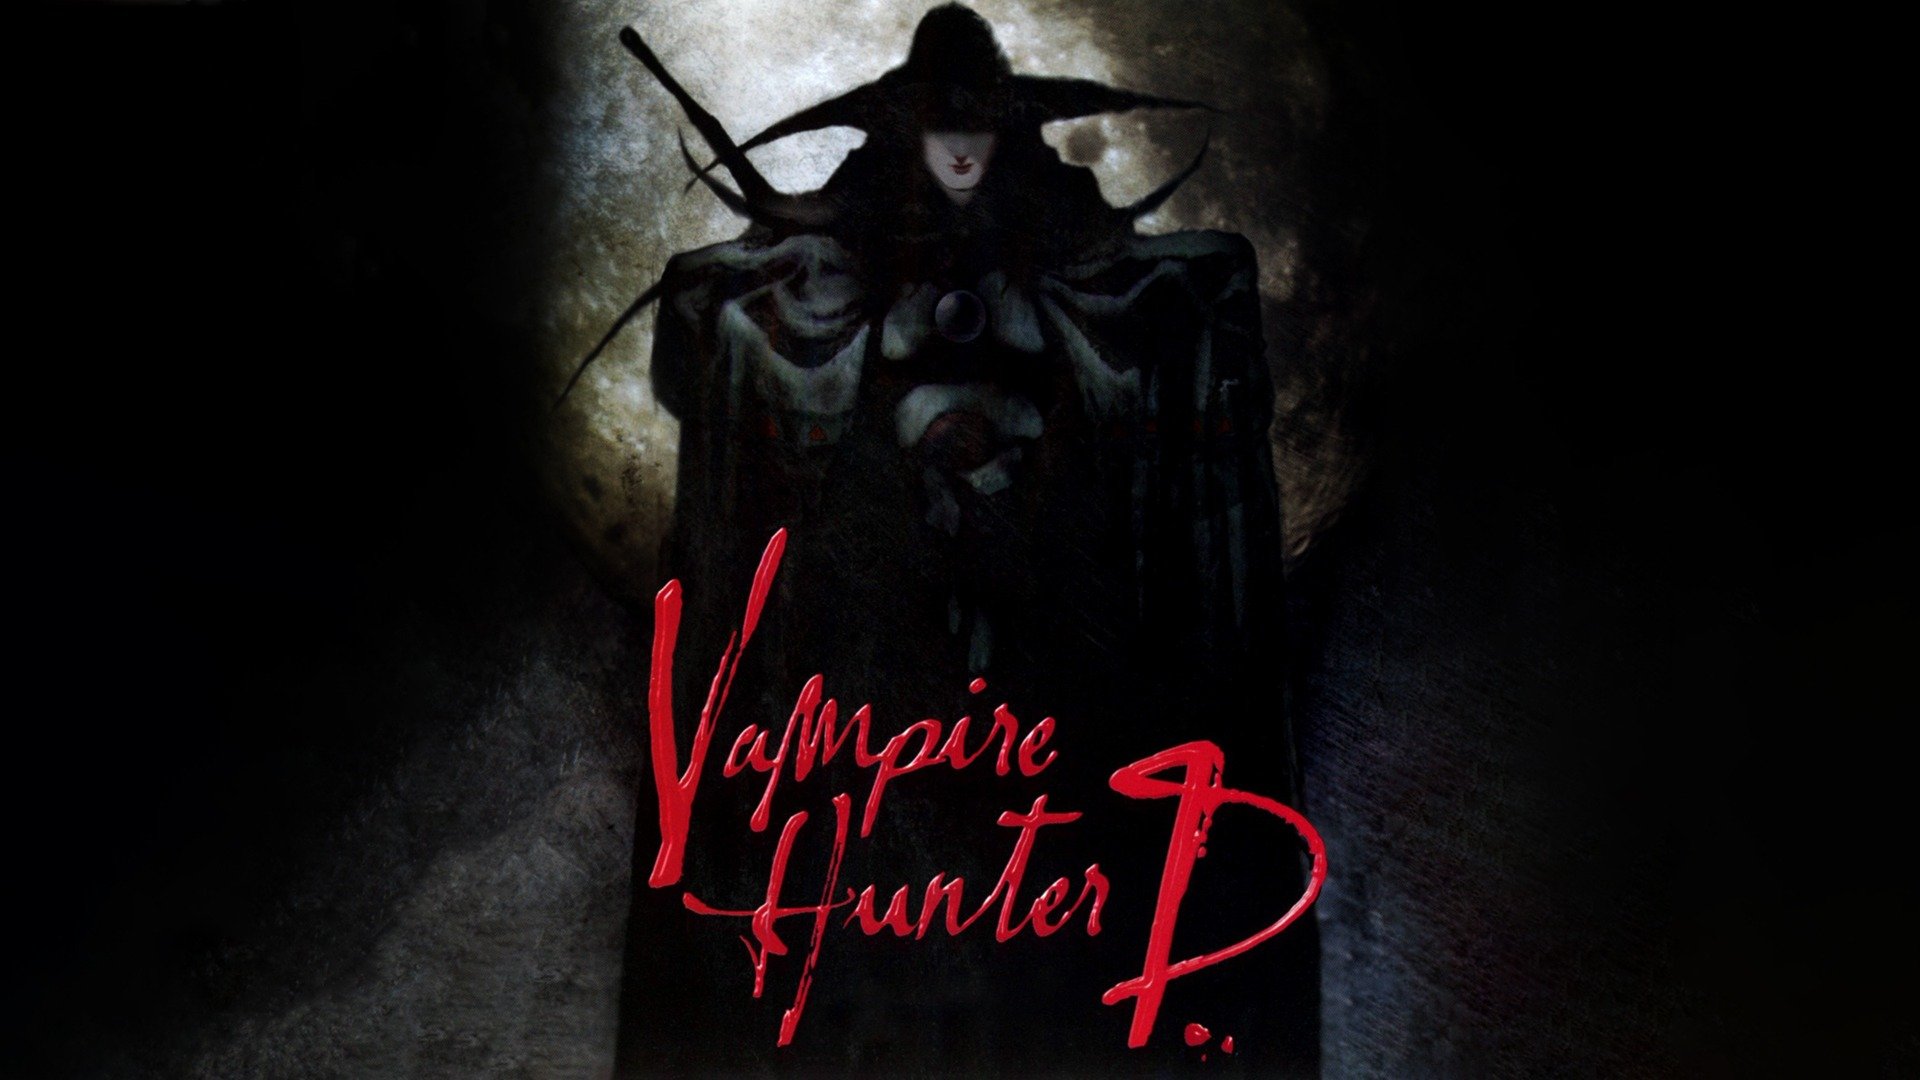 42-facts-about-the-movie-vampire-hunter-d